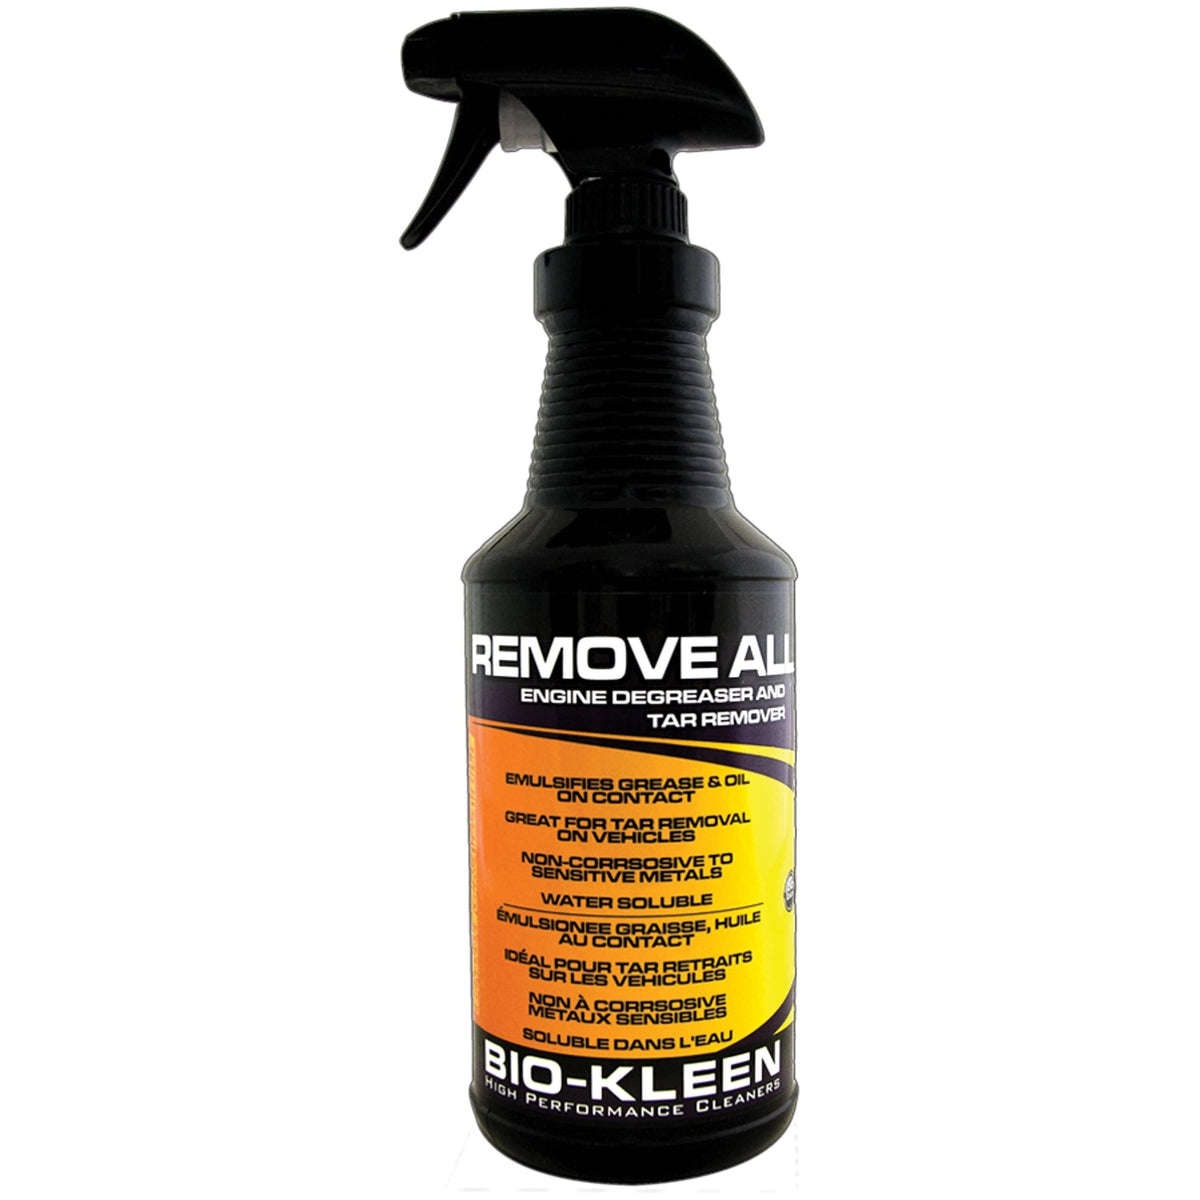 Biokleen Remove All Engine Degreaser and Tar Remover 32 oz #M05307